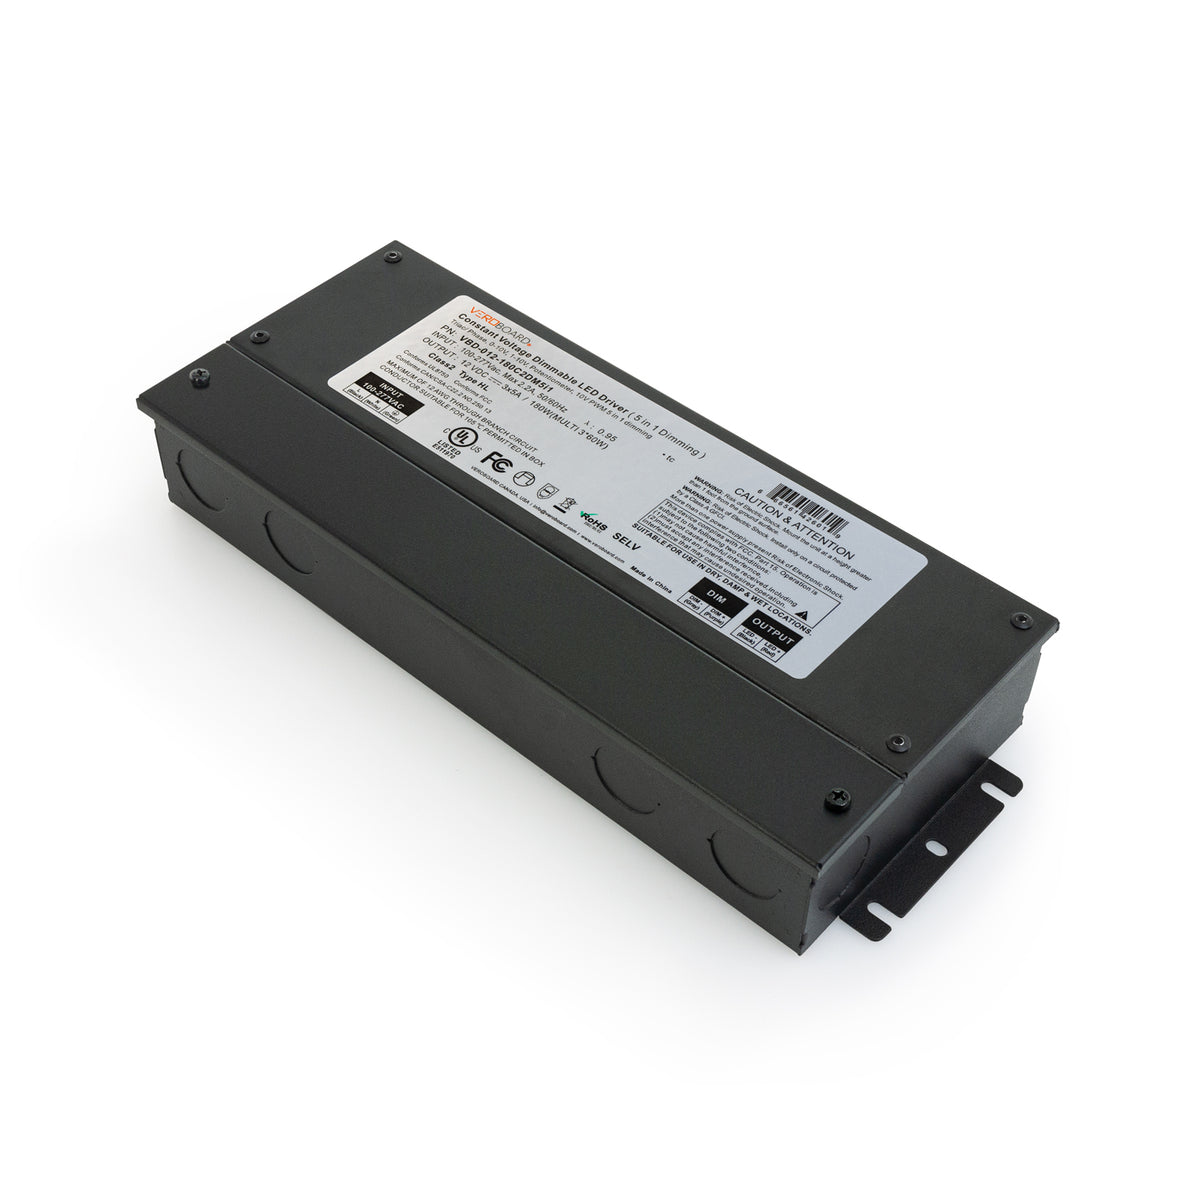 VBD-012-180C2DM5i1 Constant Voltage Dimmable Driver (5 in 1), Veroboard